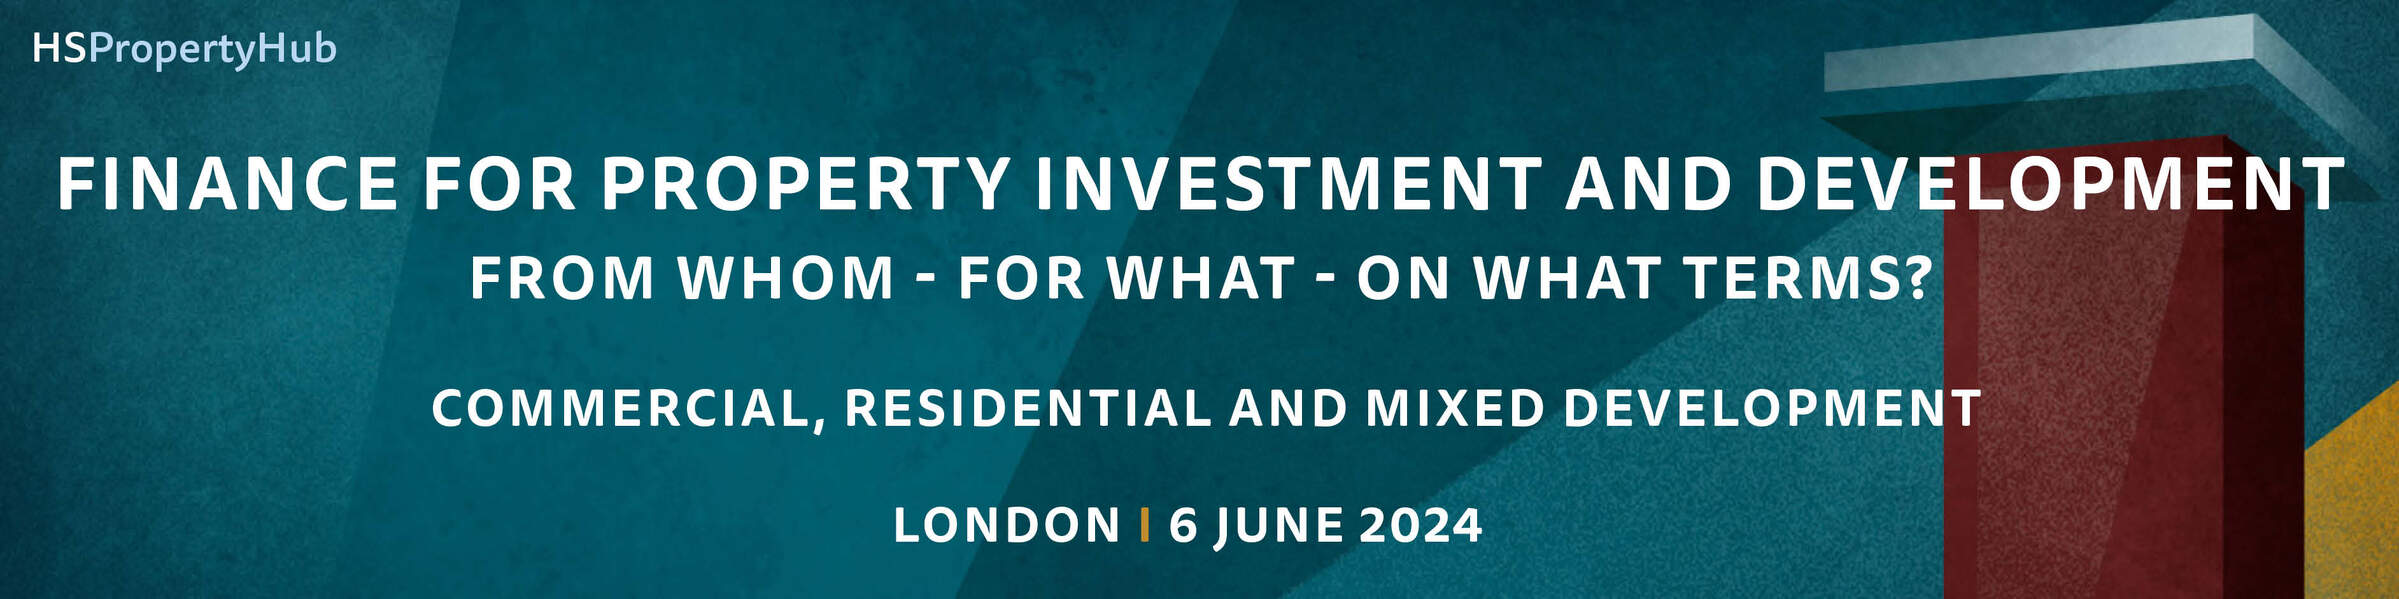 Finance for Property Investment and Development 2024